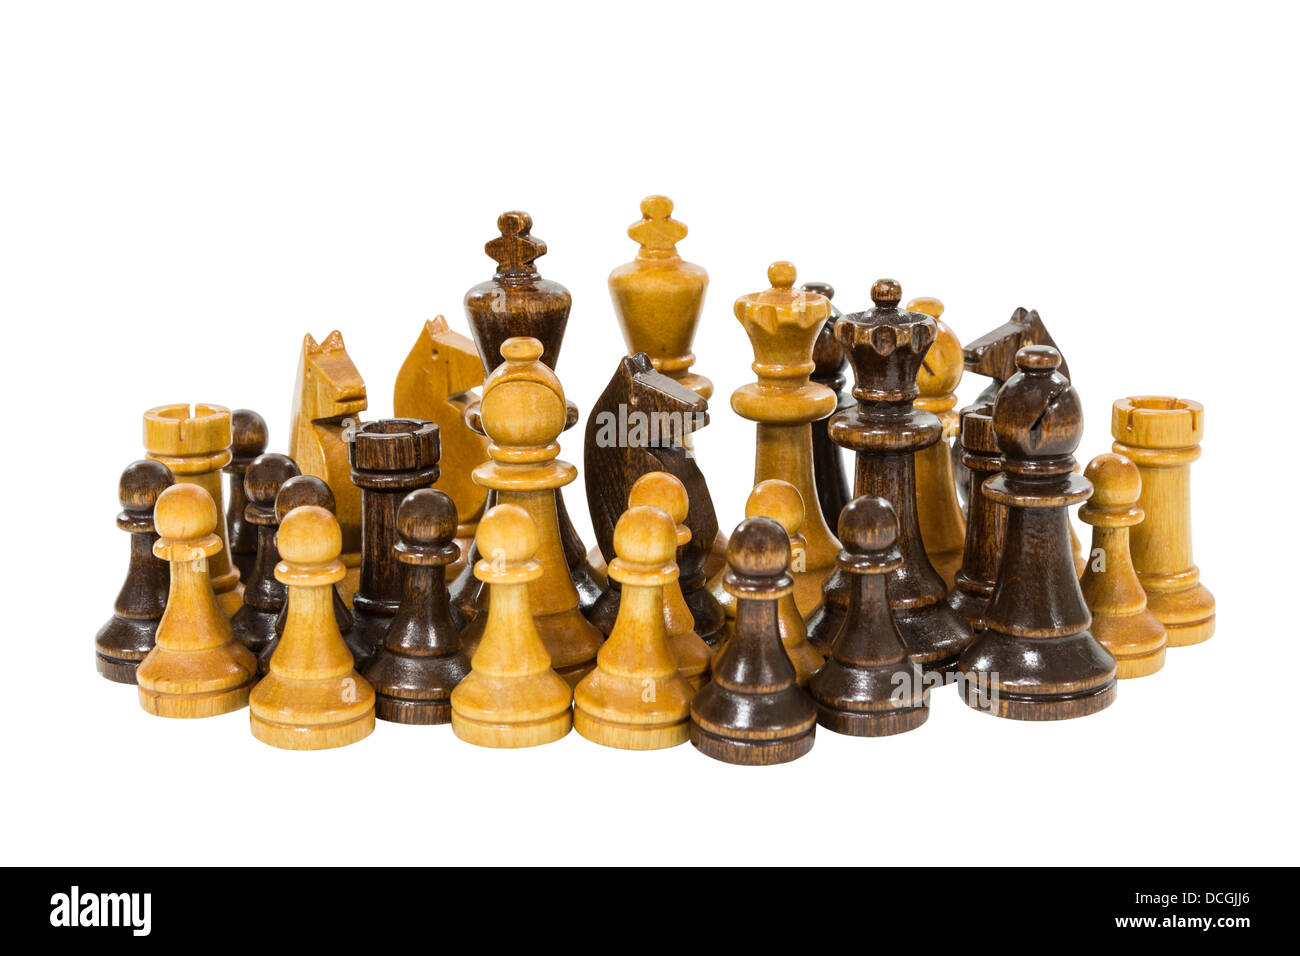 Vintage wooden chess pieces isolated on white. Stock Photo